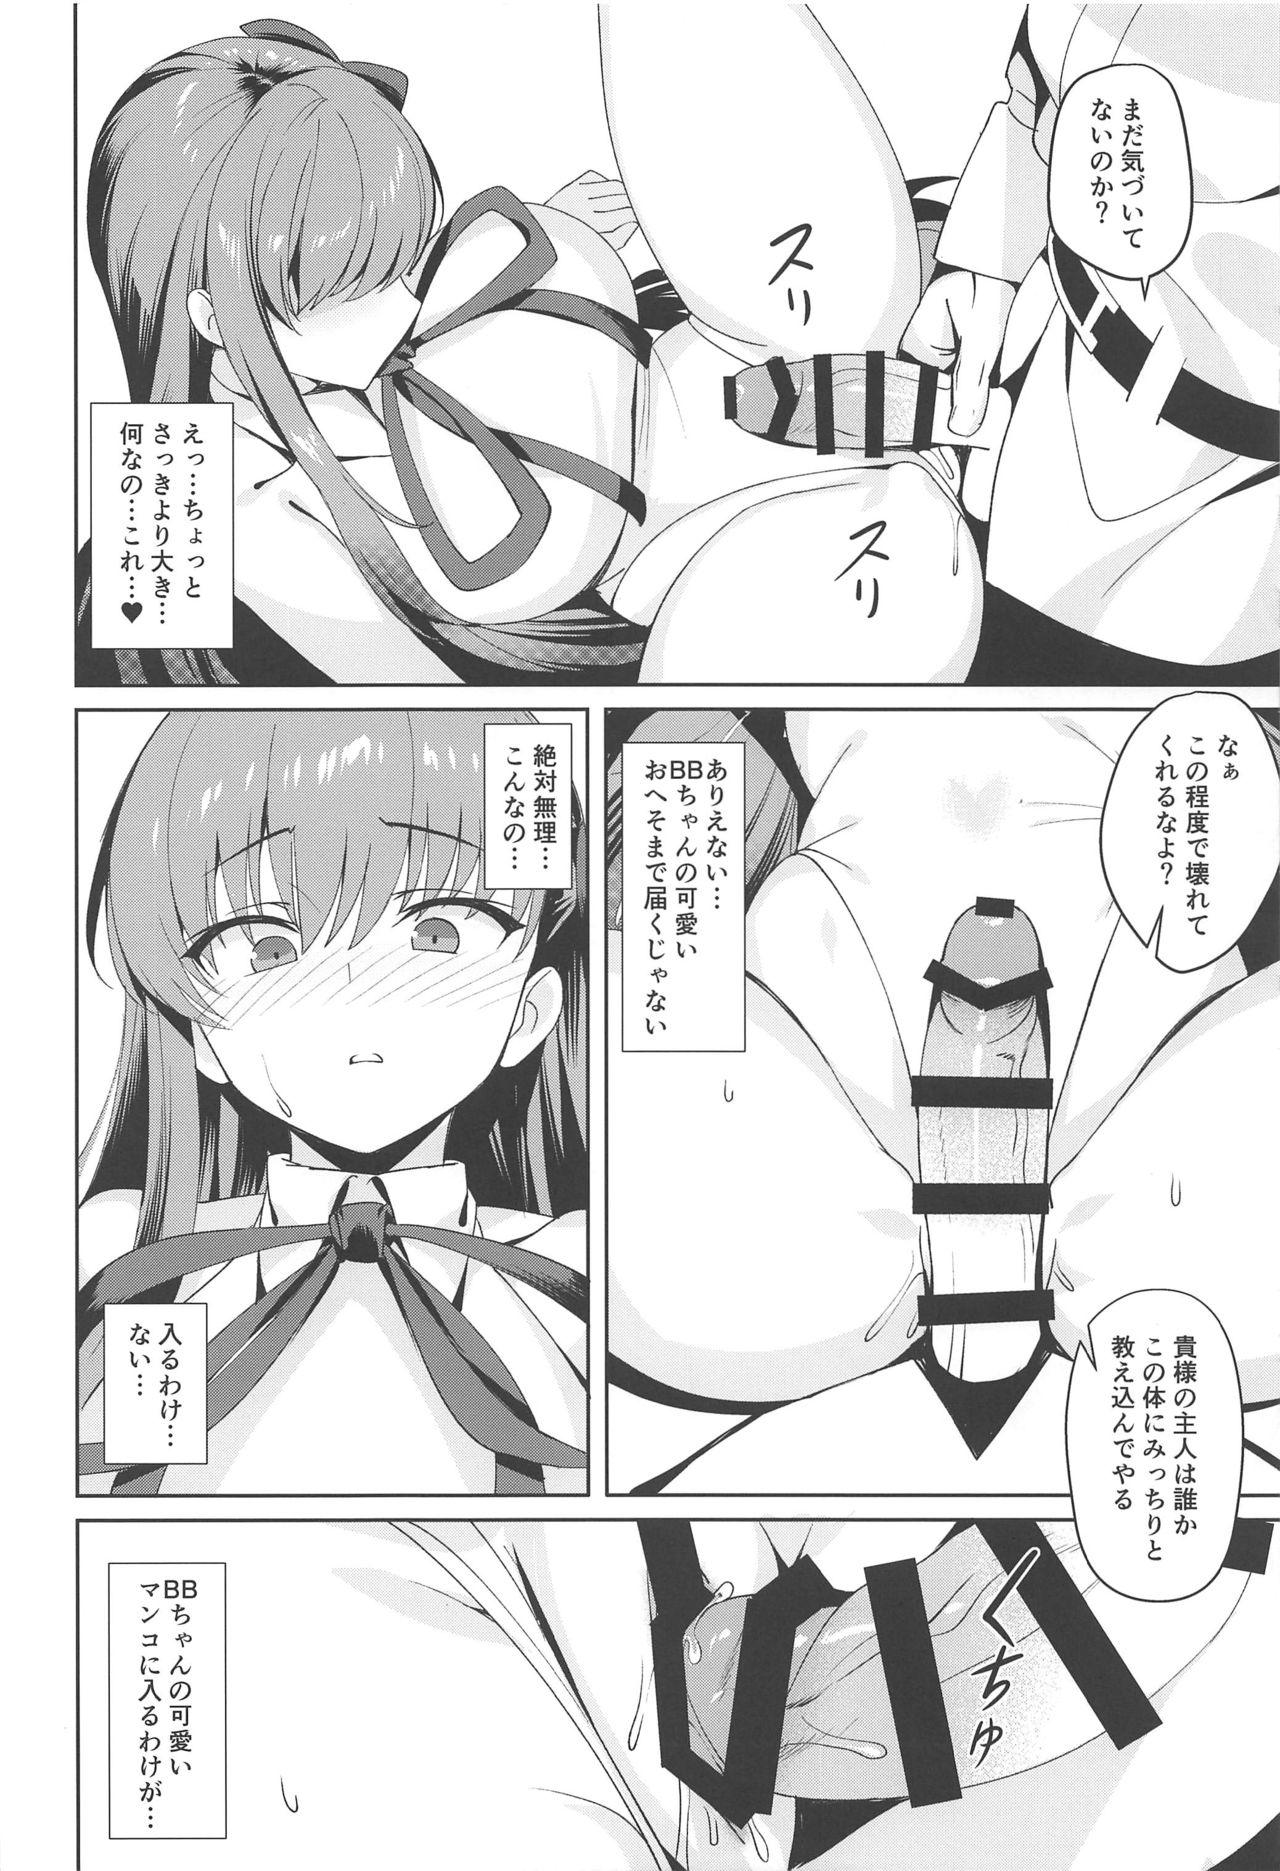 Chubby Namaiki - Fate grand order Gets - Page 11